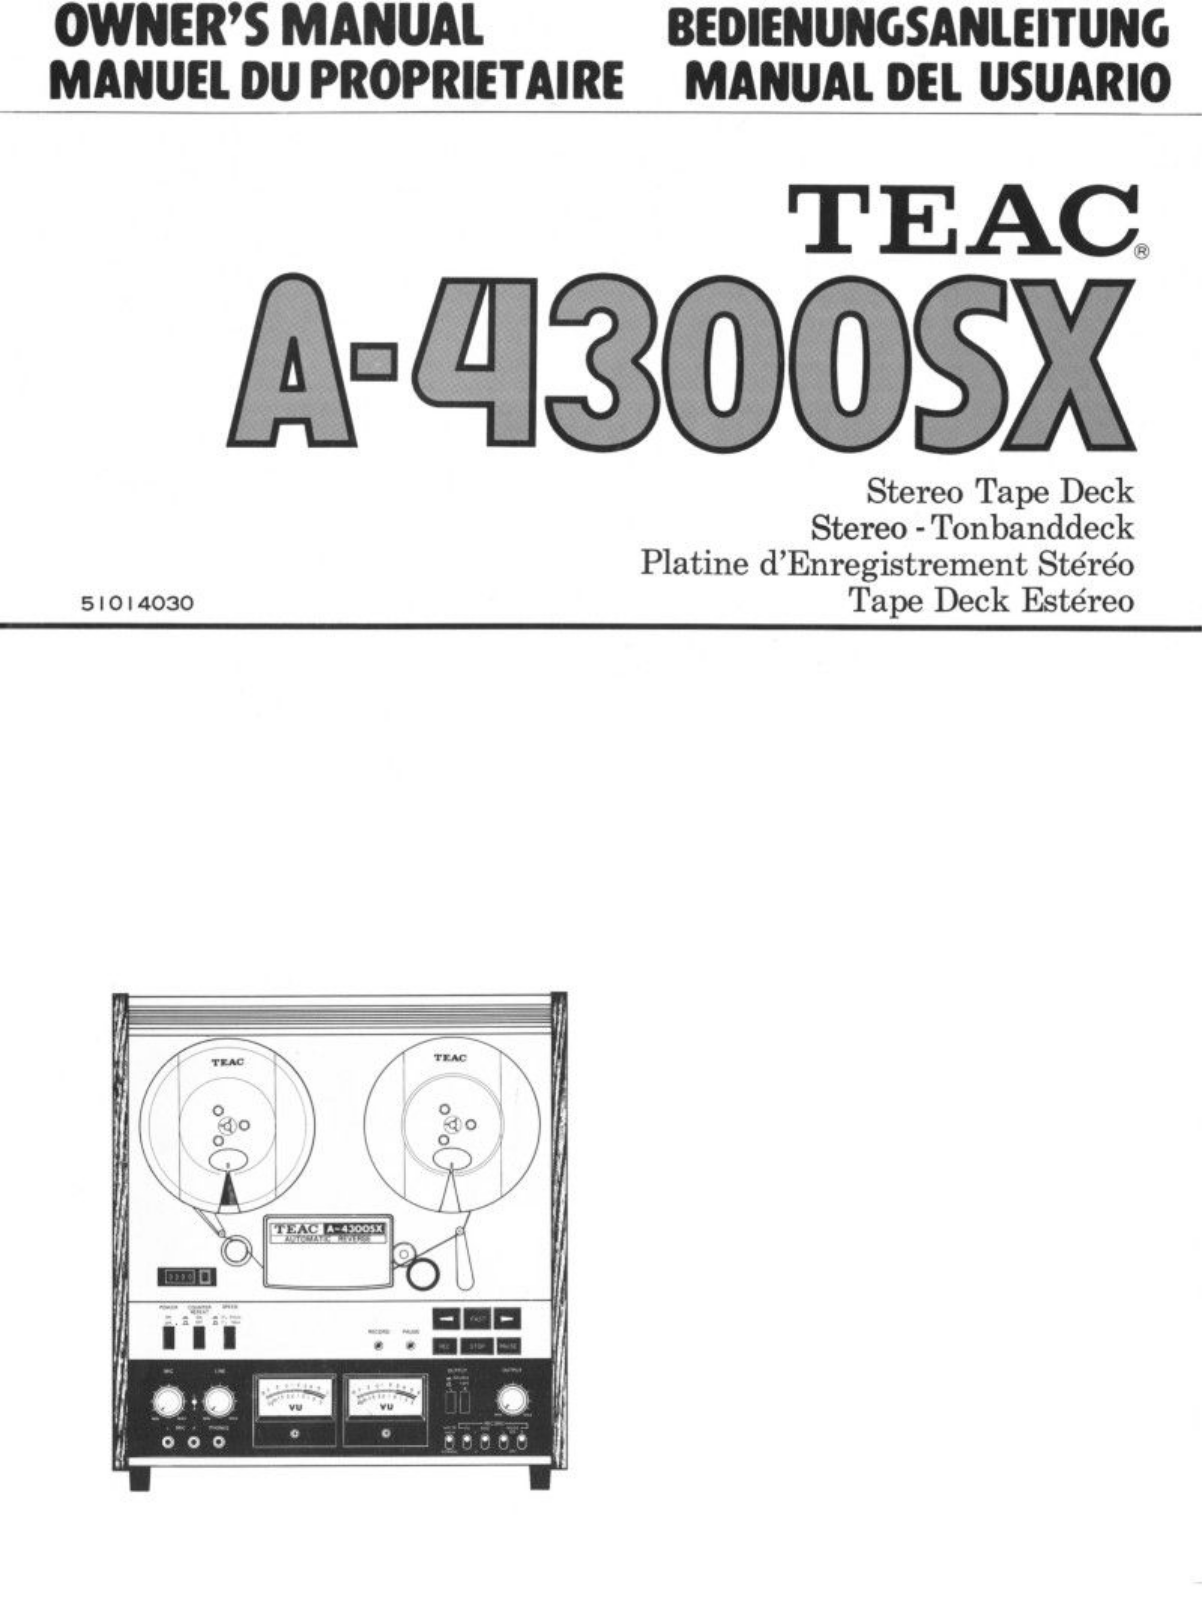 TEAC A-4300-SX Owners manual